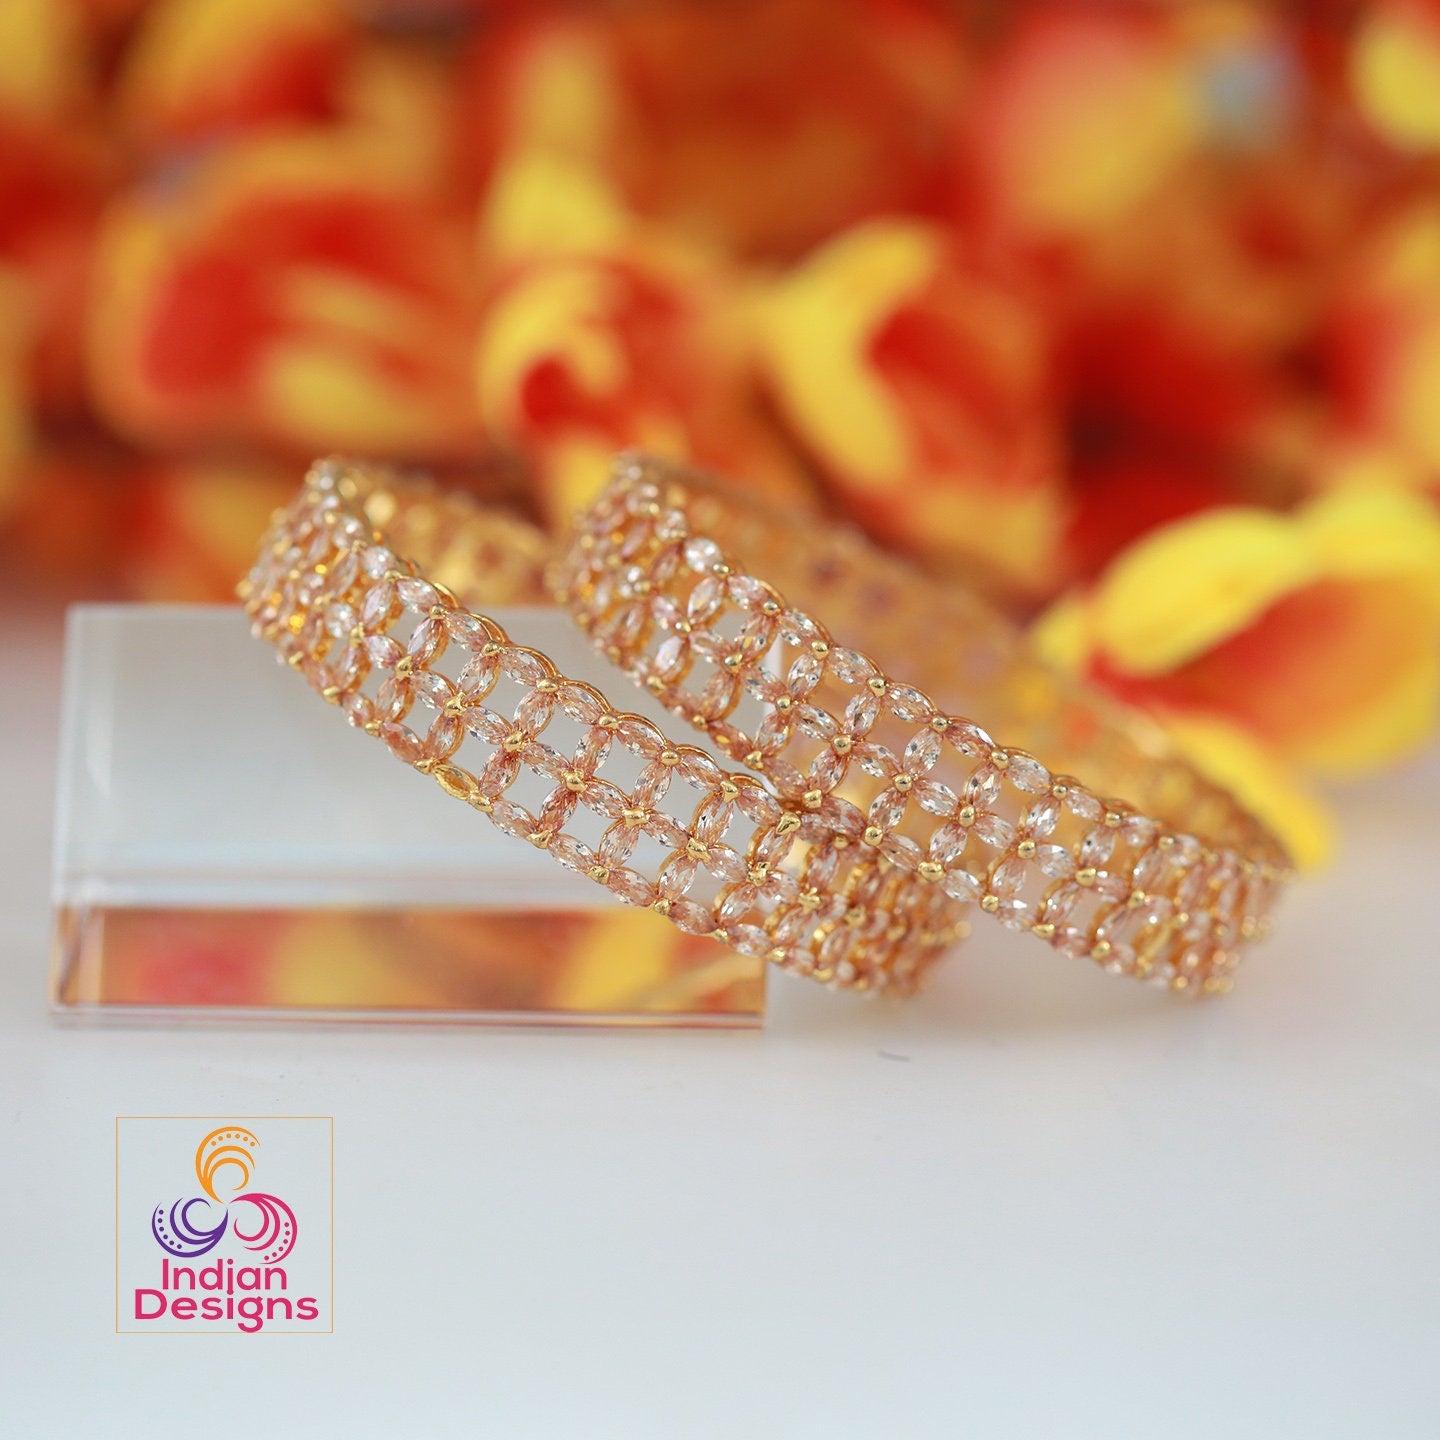 Gold plated Topaz stone Bangles | Floral Design American diamond bracelet and bangles | pair of Bollywood style Bangles from Indian Designs